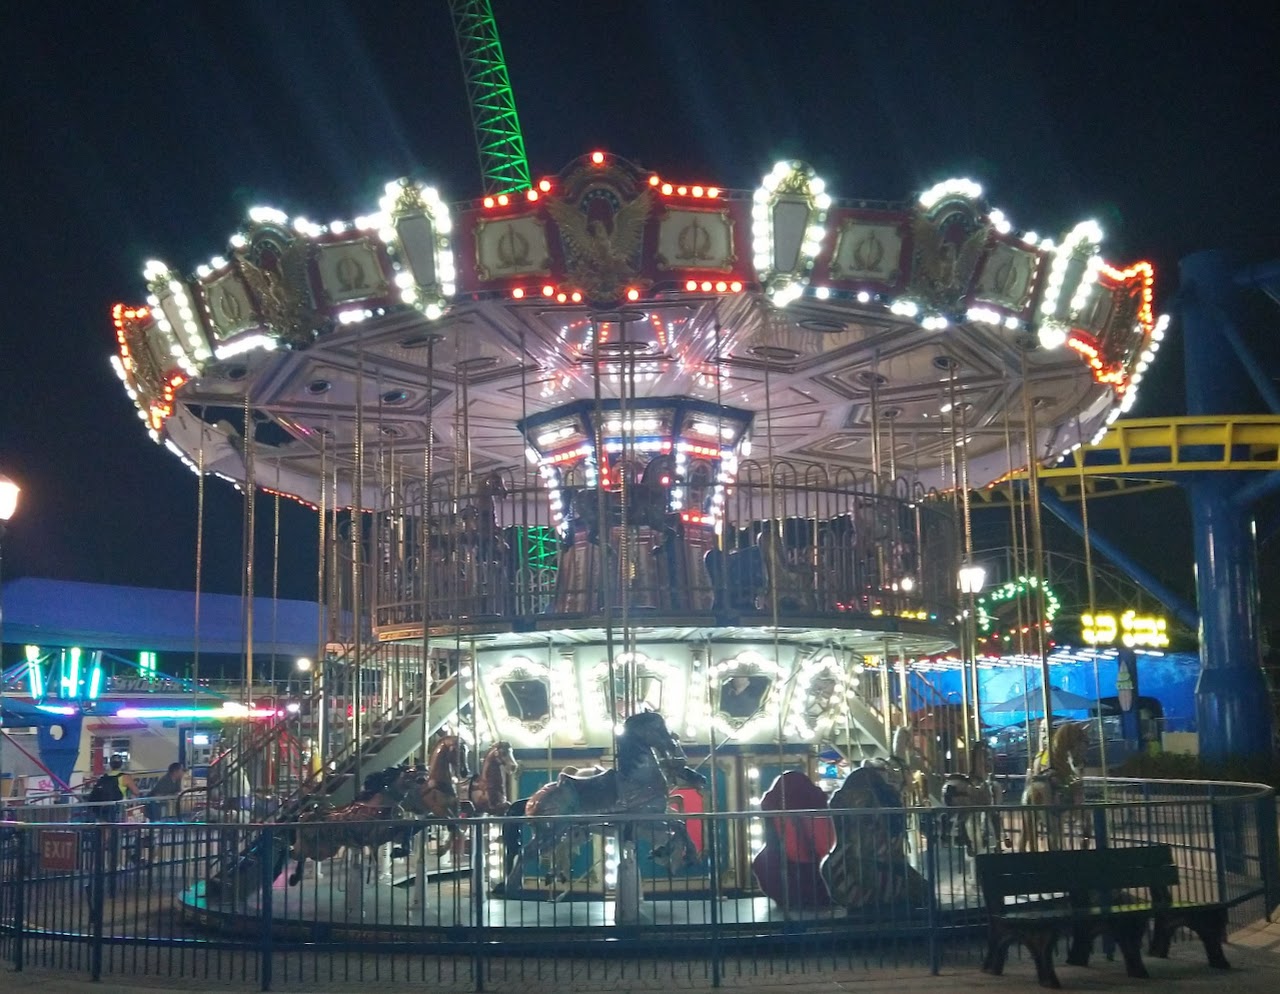 Double decker carousel at night, all the lights are on